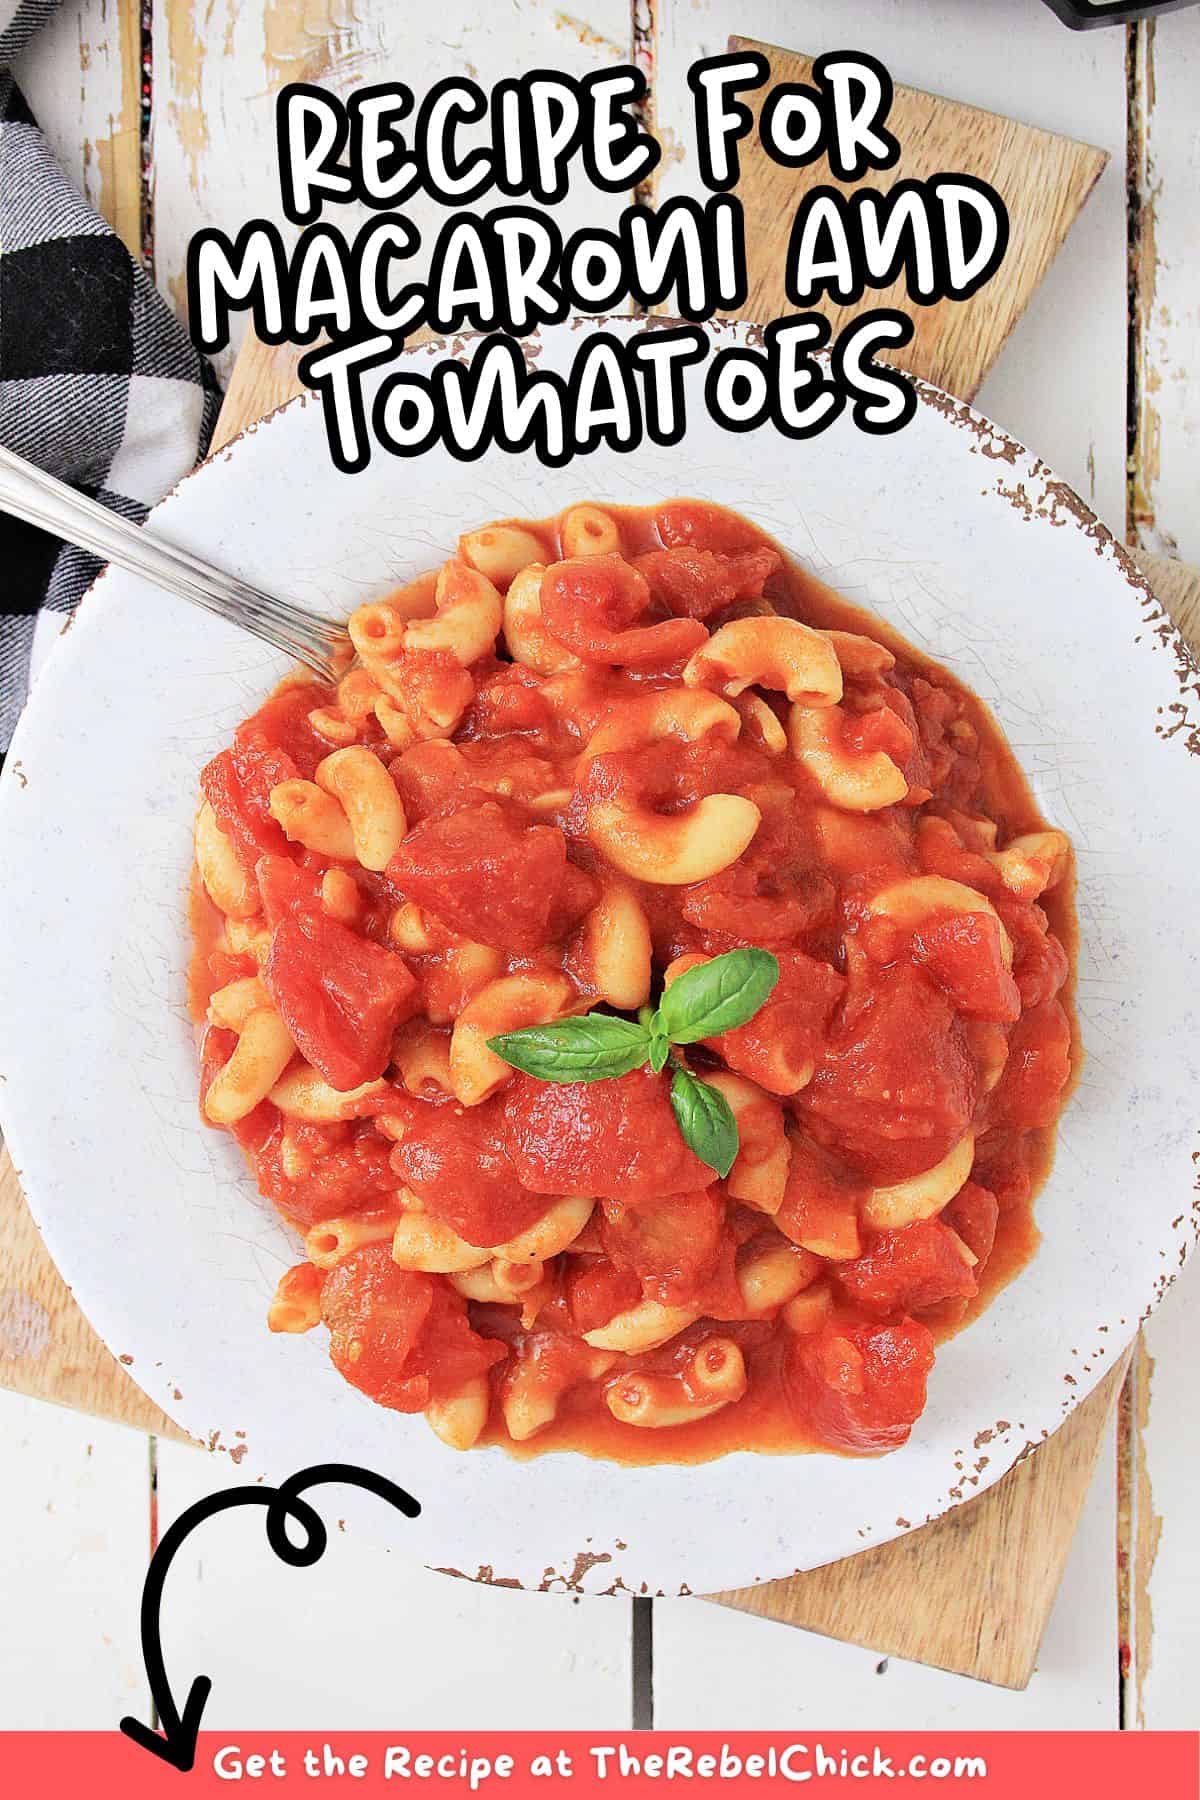 Recipe for Macaroni and Tomatoes